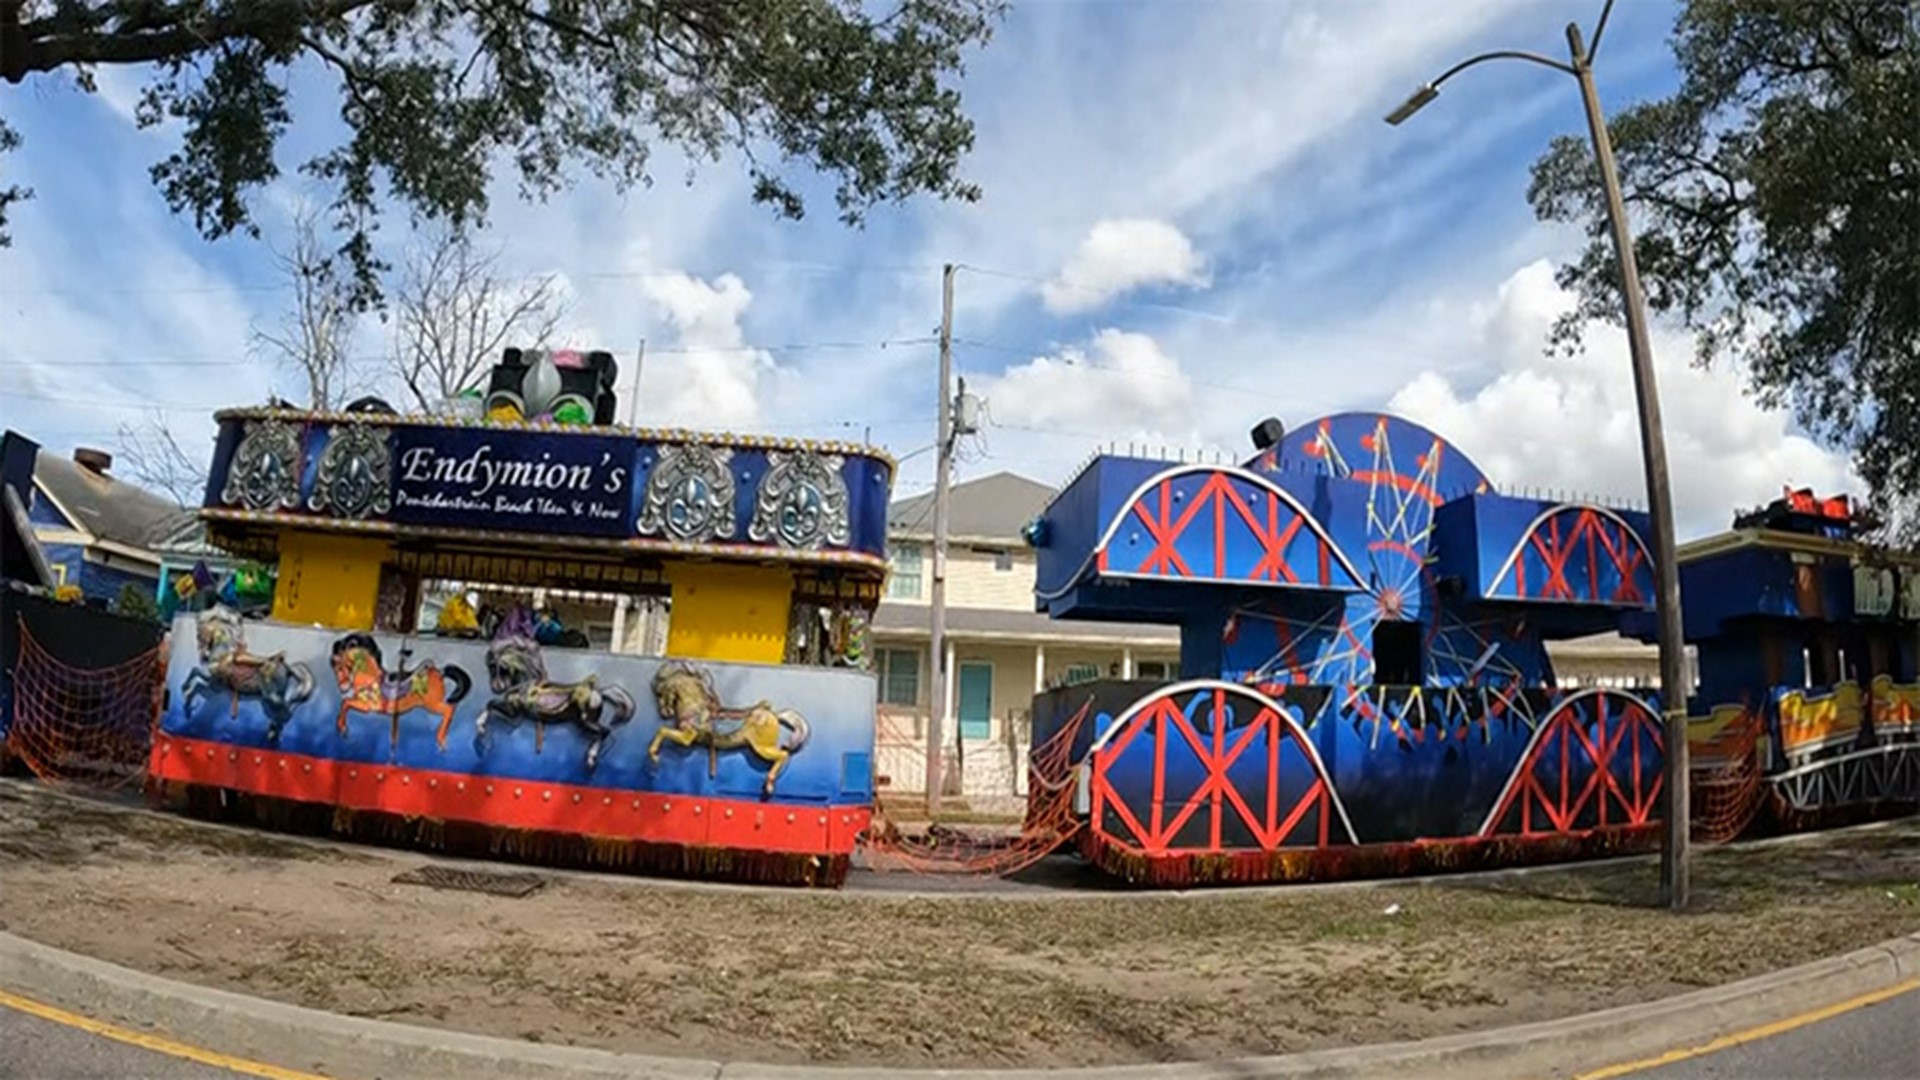 If traffic in and around New Orleans wasn't bad enough during Mardi Gras, a road work project on Orleans has half of Endymion's massive floats stuck blocking cars.